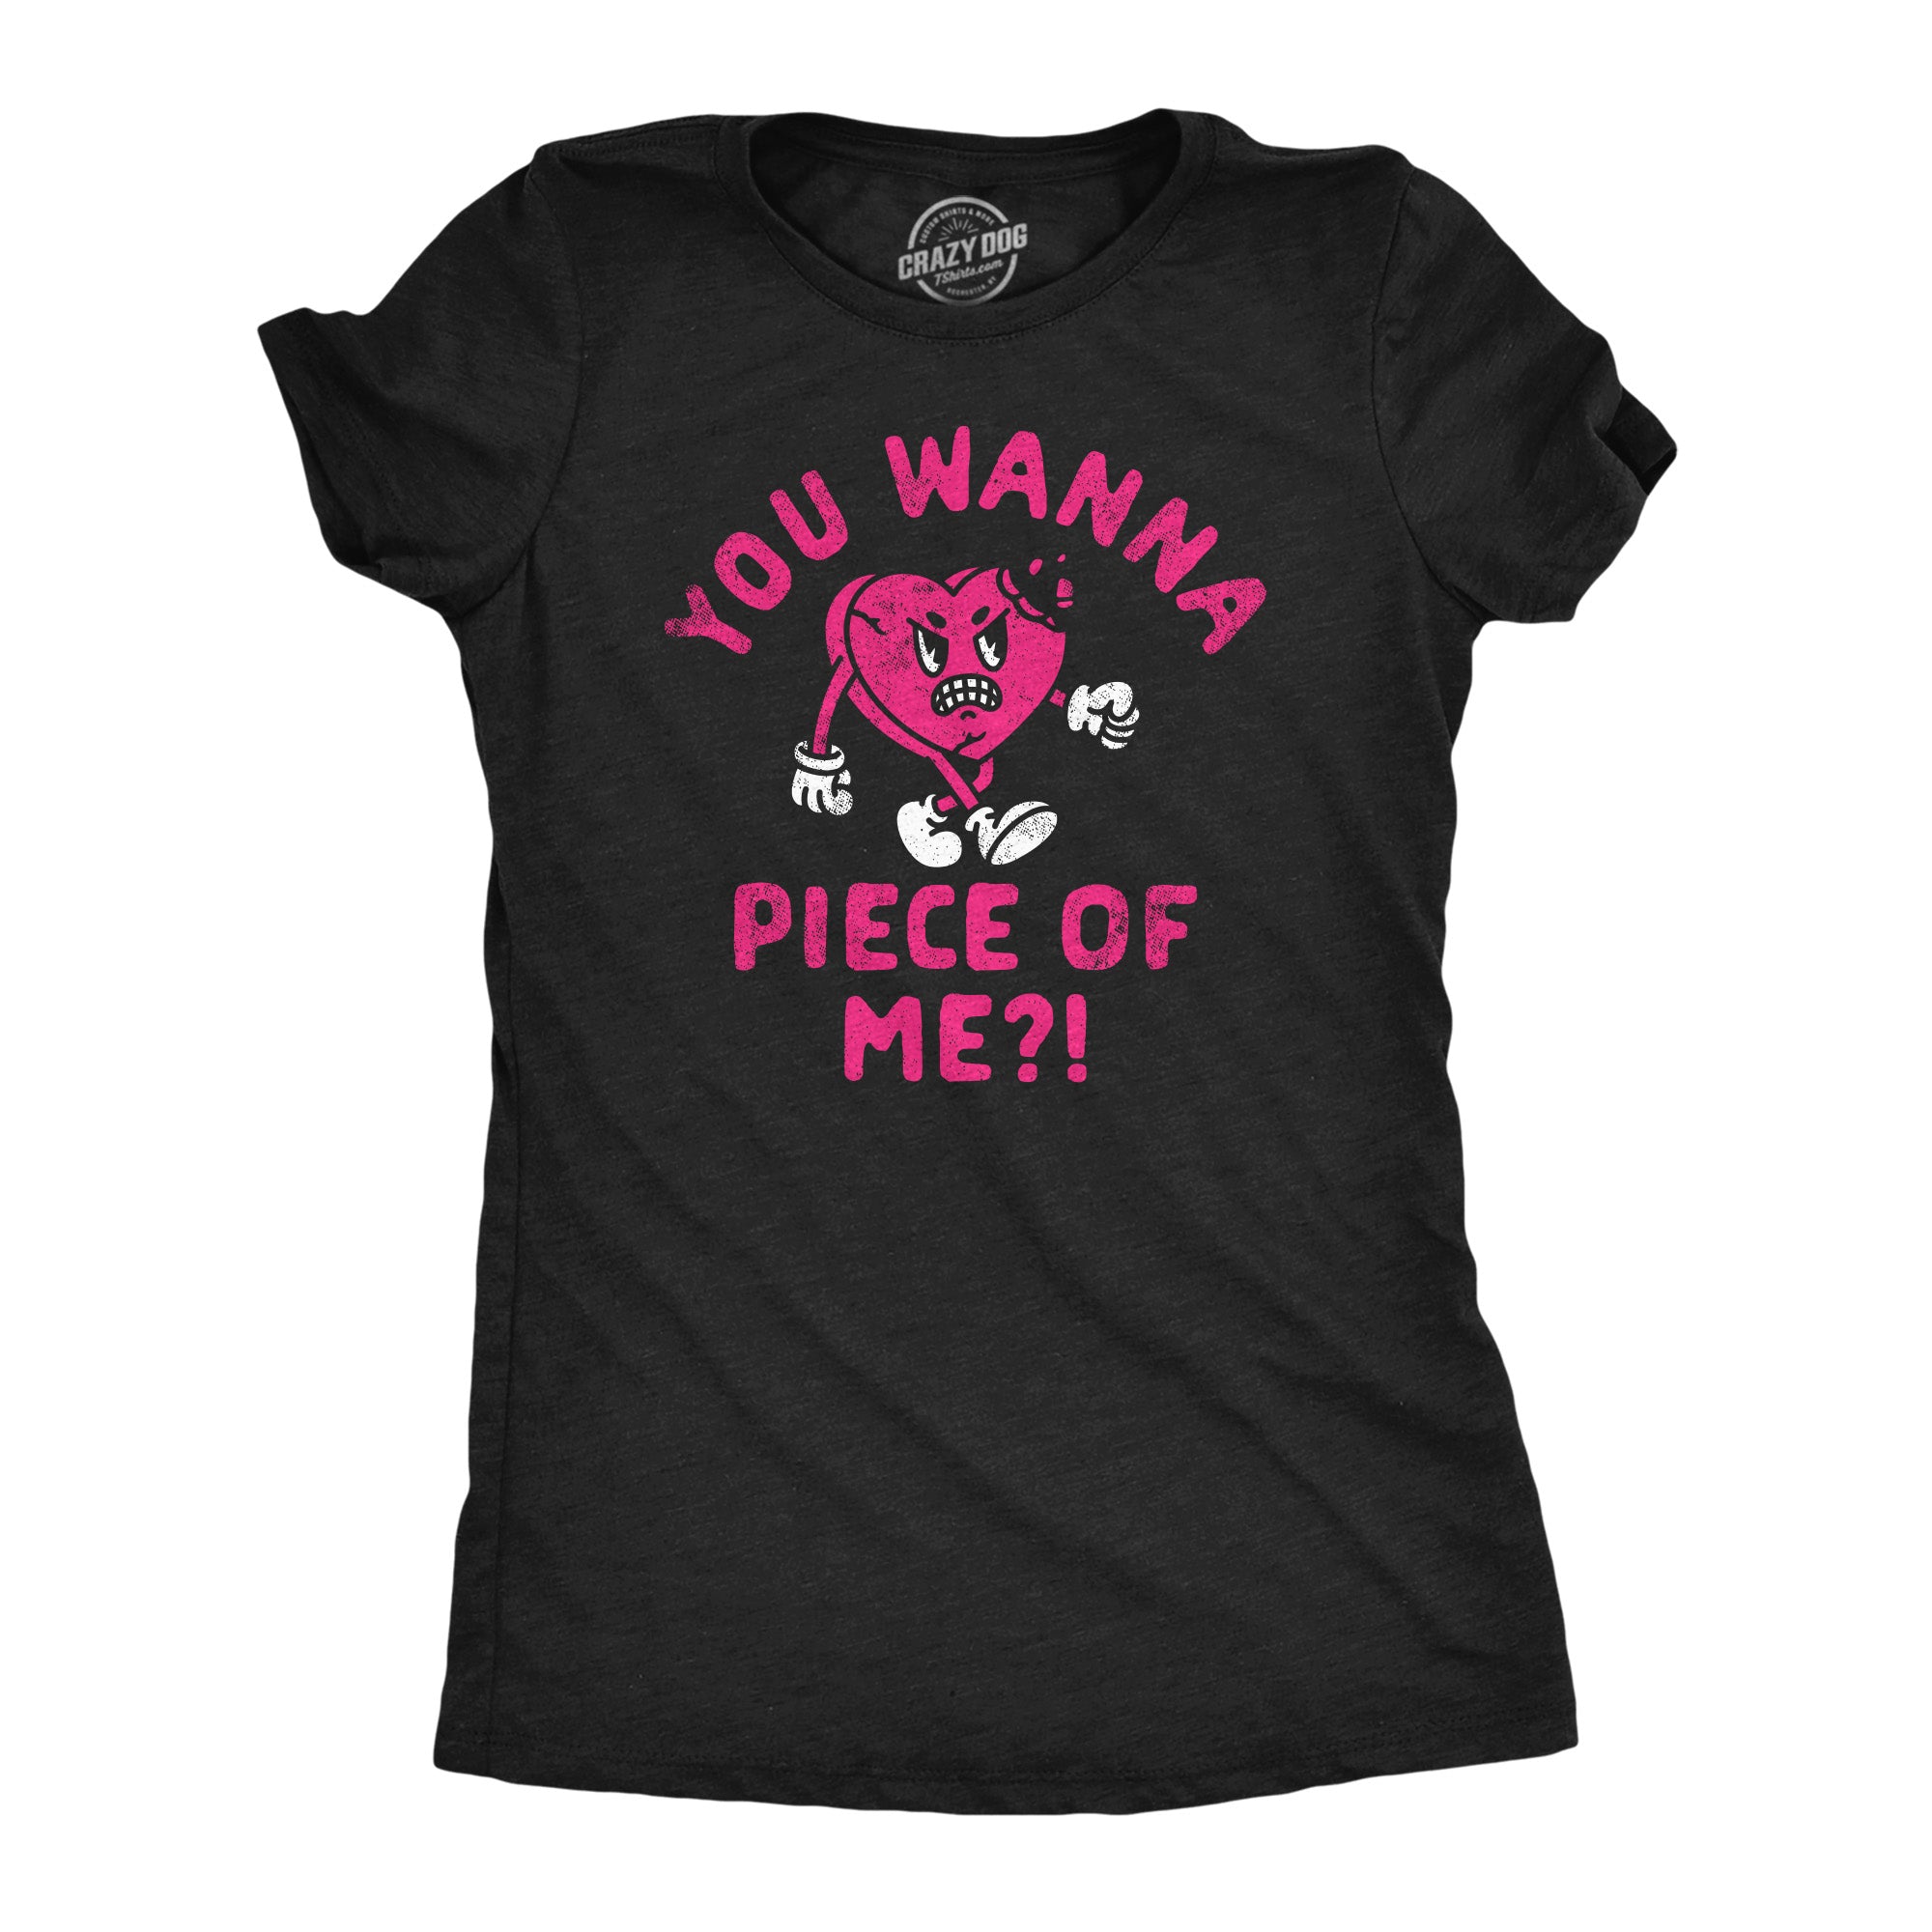 Funny Heather Black - You Wanna Piece Of Me You Wanna Piece Of Me Womens T Shirt Nerdy Valentine's Day Sarcastic Tee